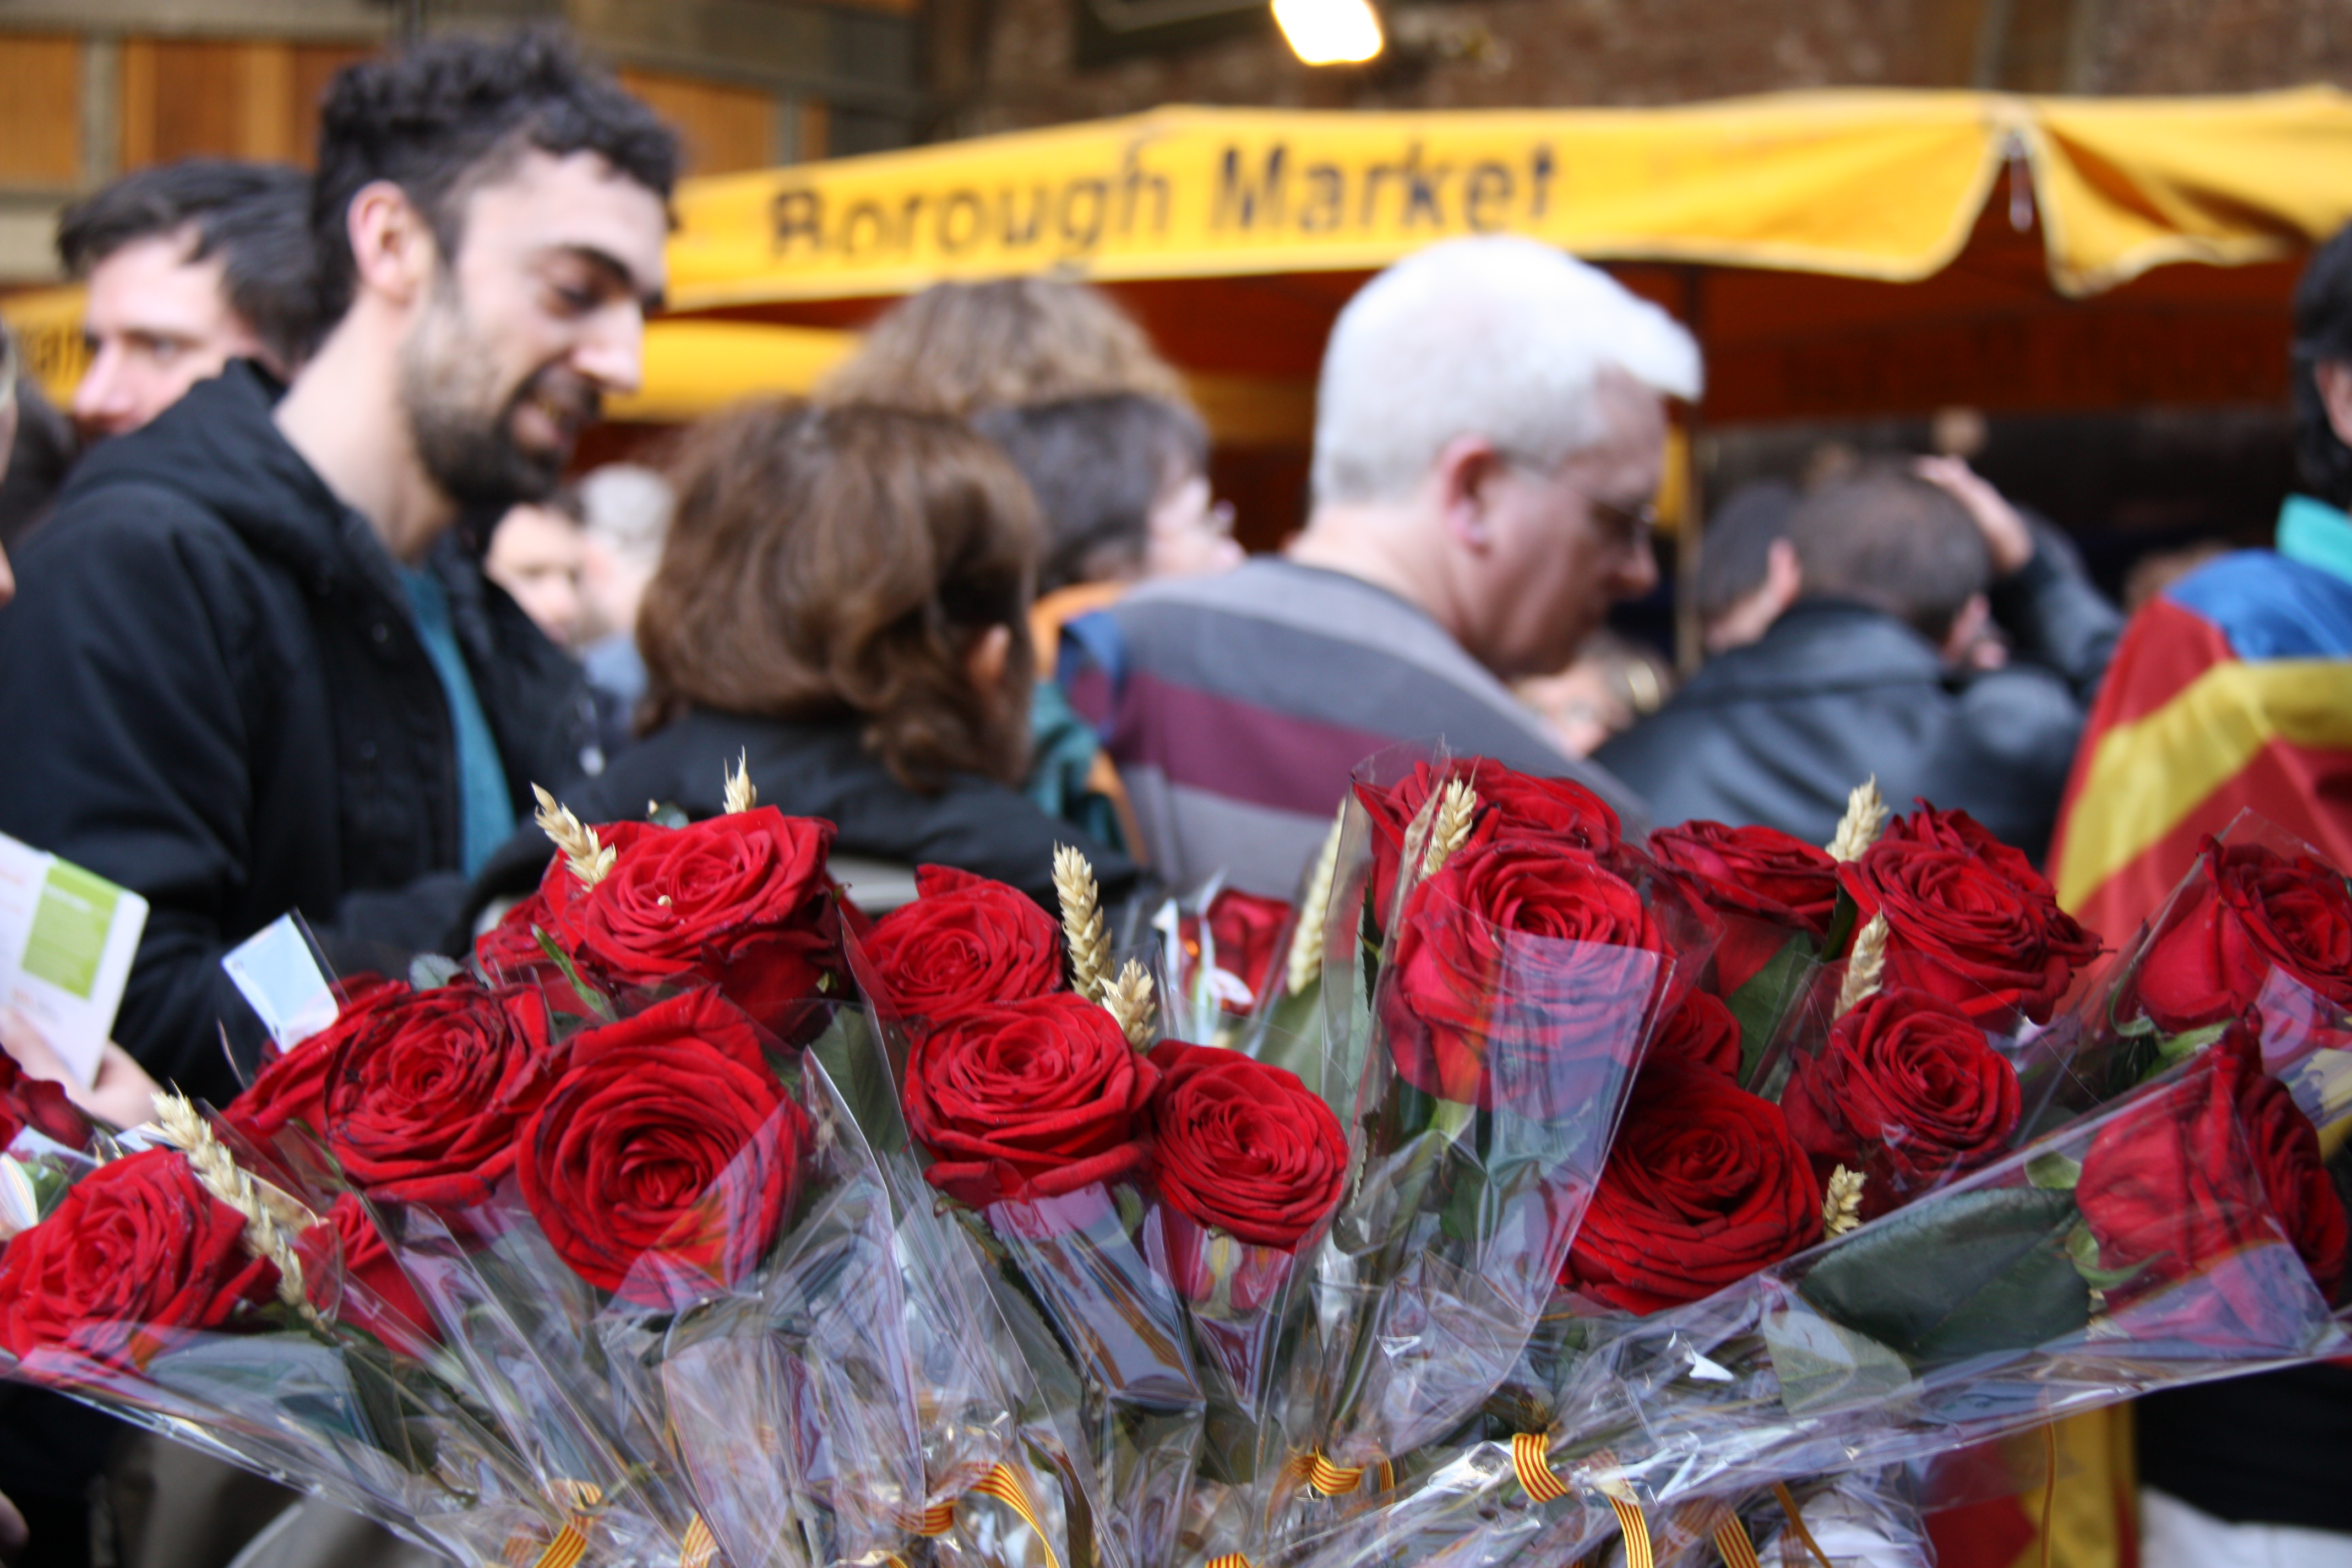 Roses and books to celebrate Sant Jordi's Day at London's Borough Market (by ACN)